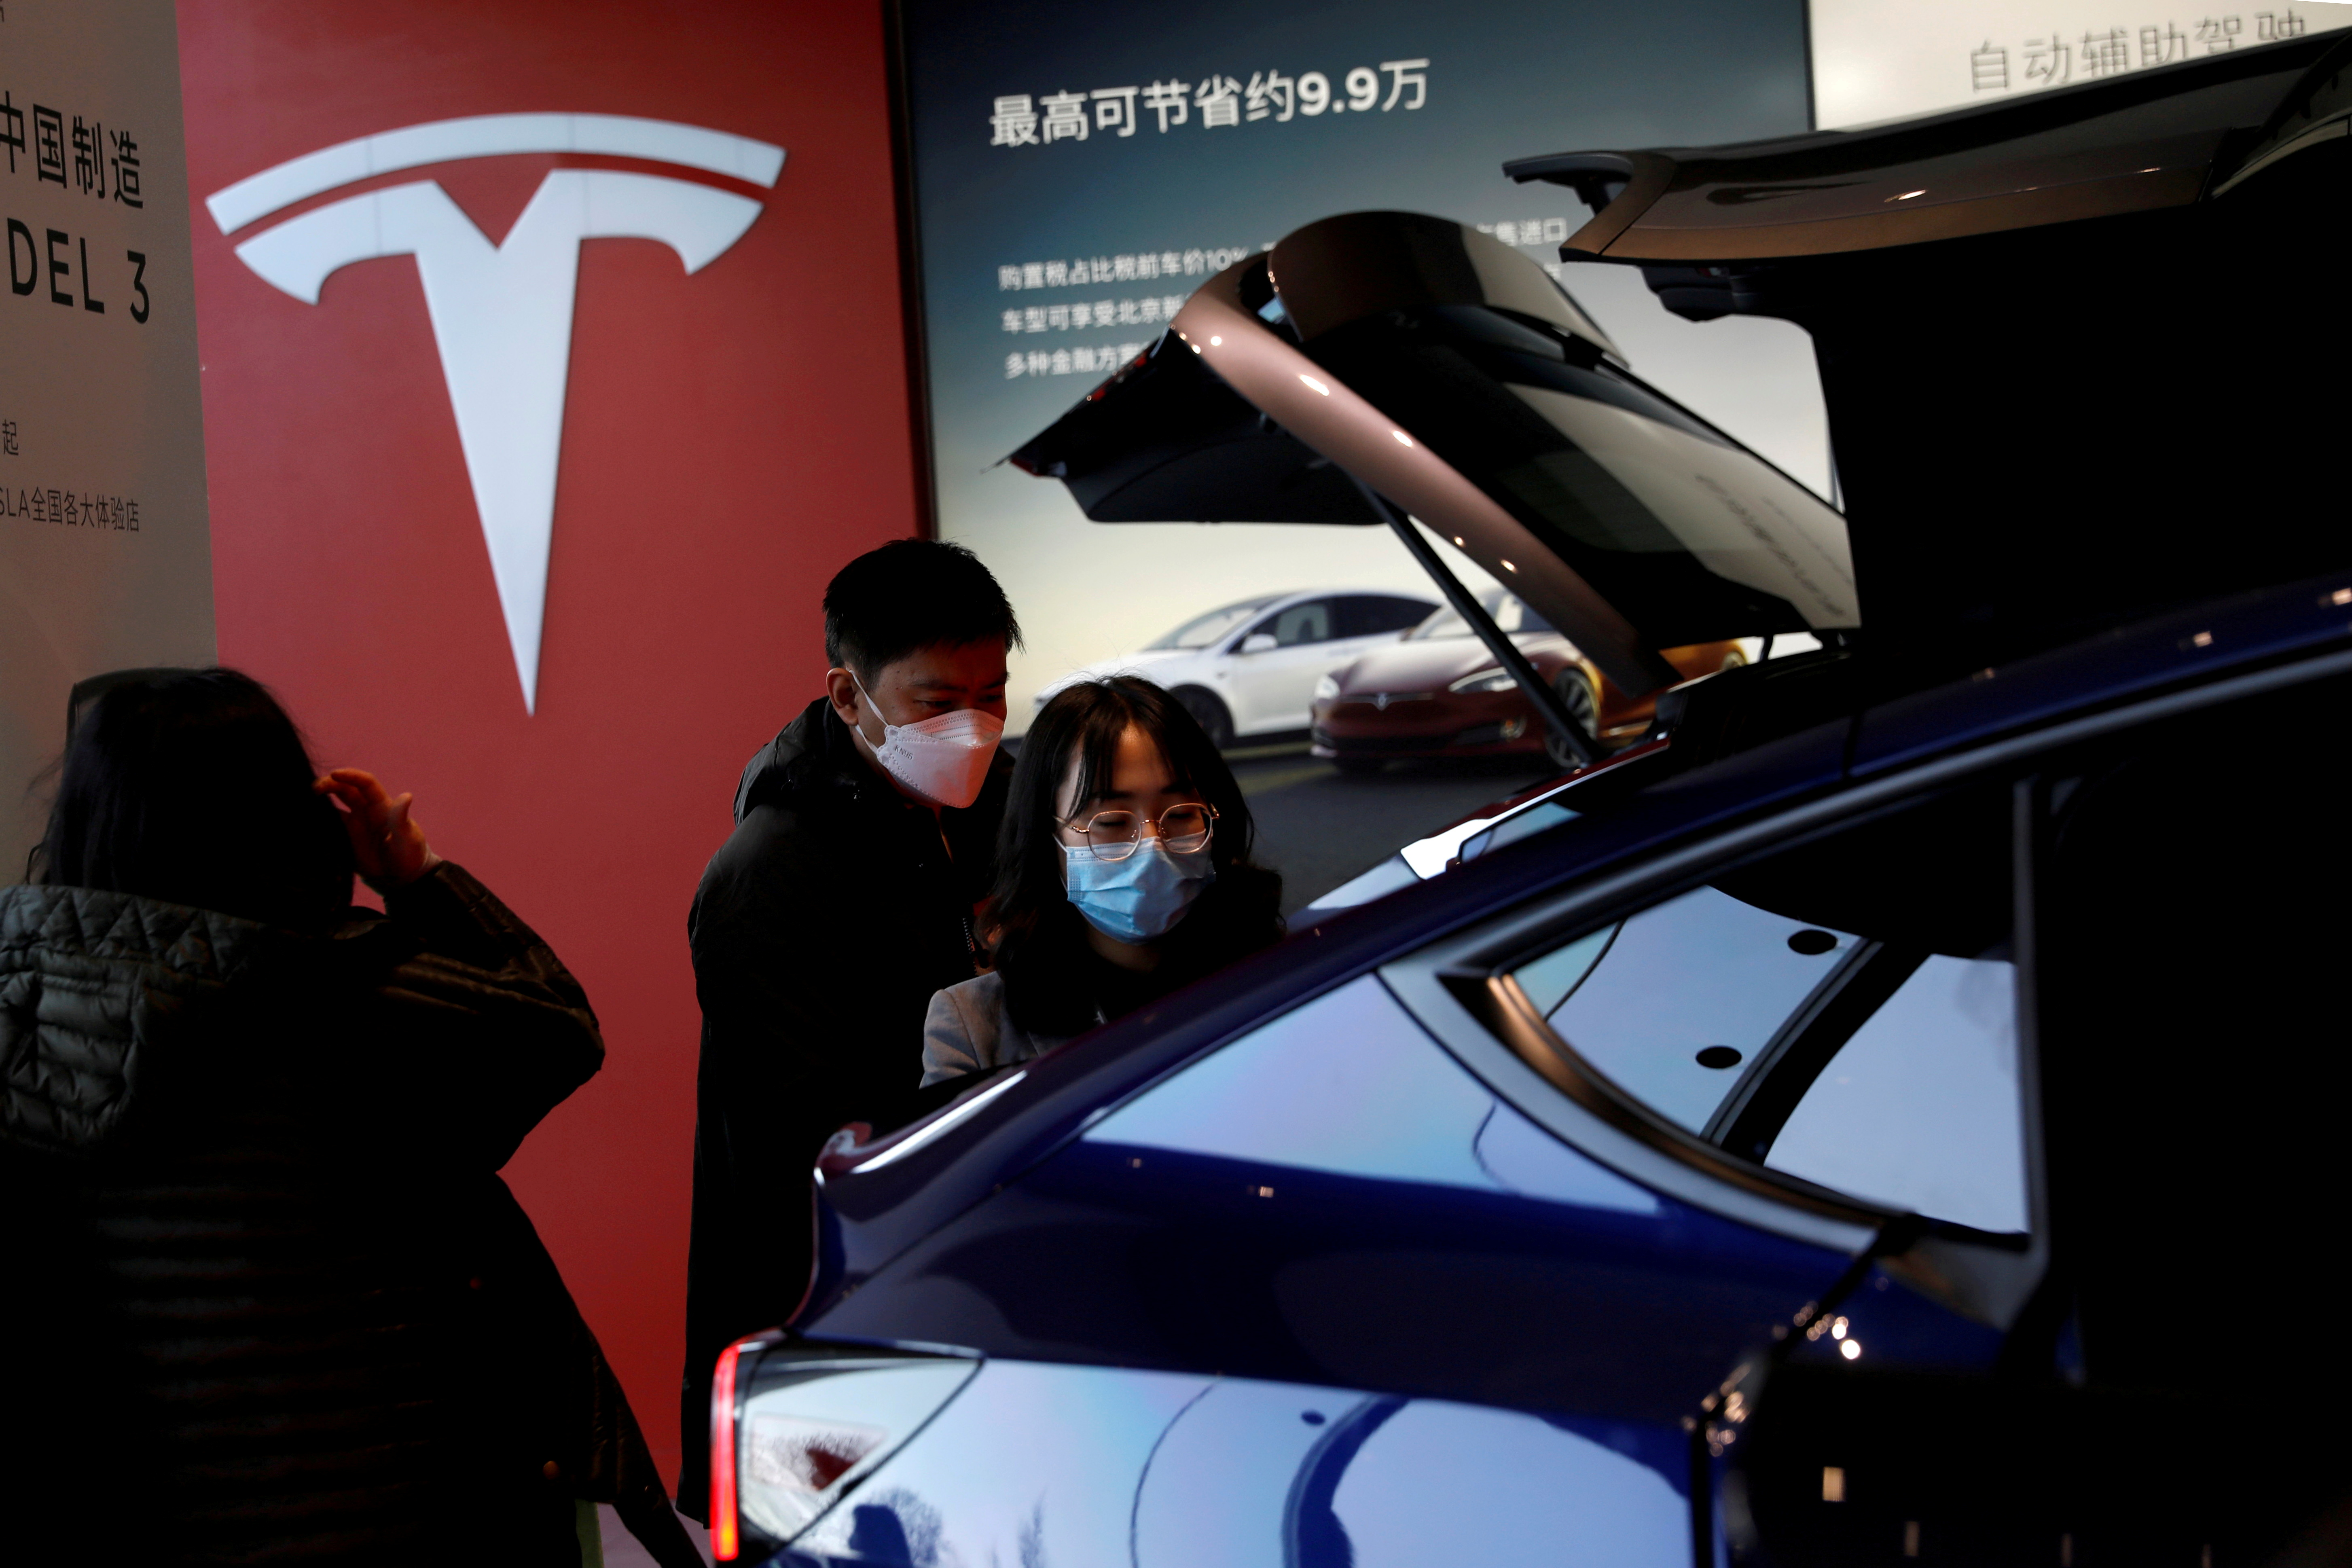 Tesla’s China-made EV gross sales slide in July from June as BYD stretches lead